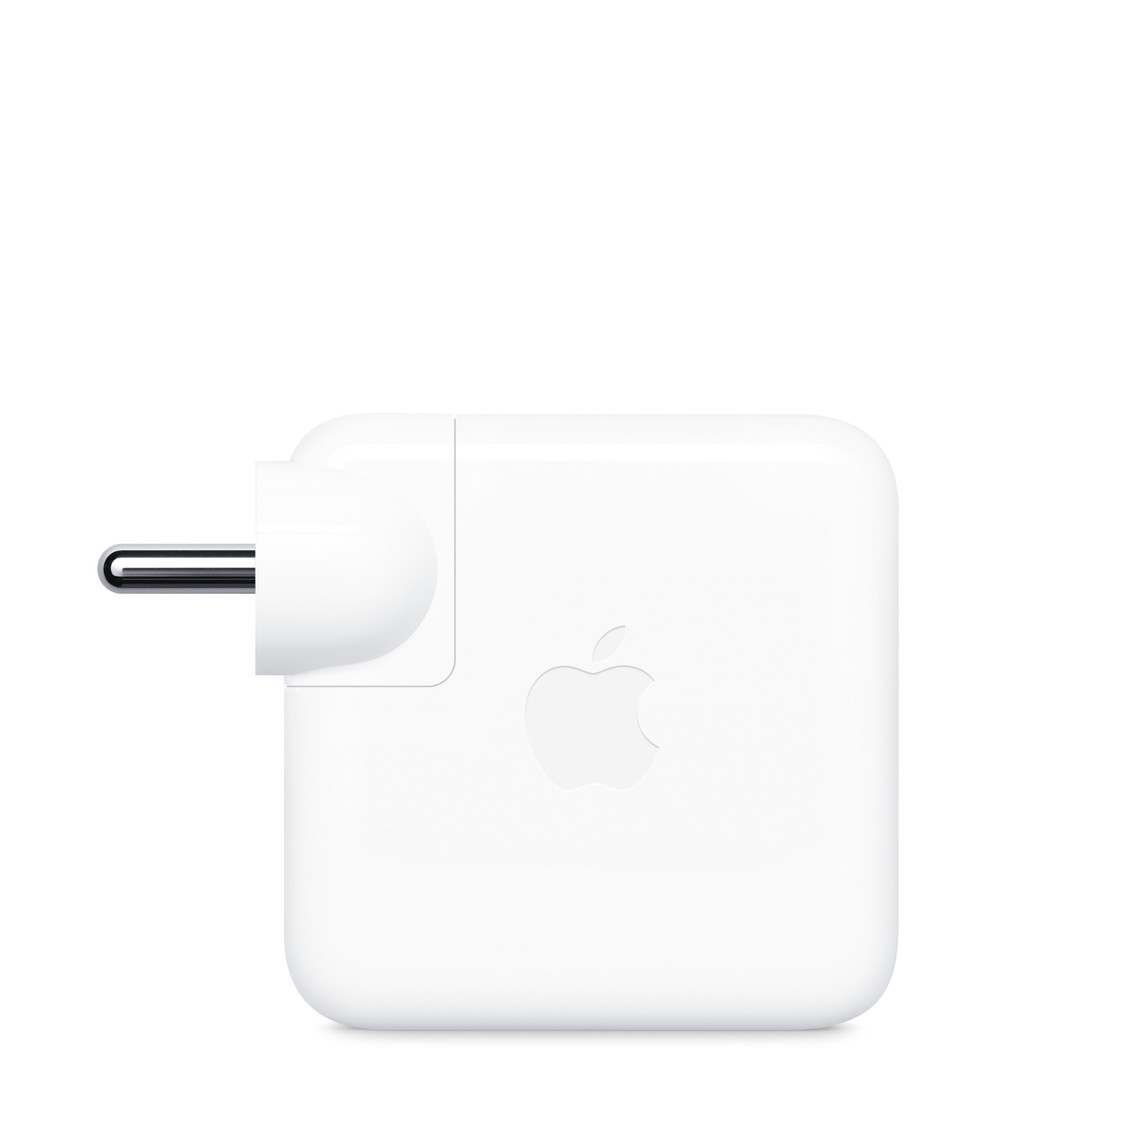 Power adapter, square, rounded corners, white, Apple logo centred